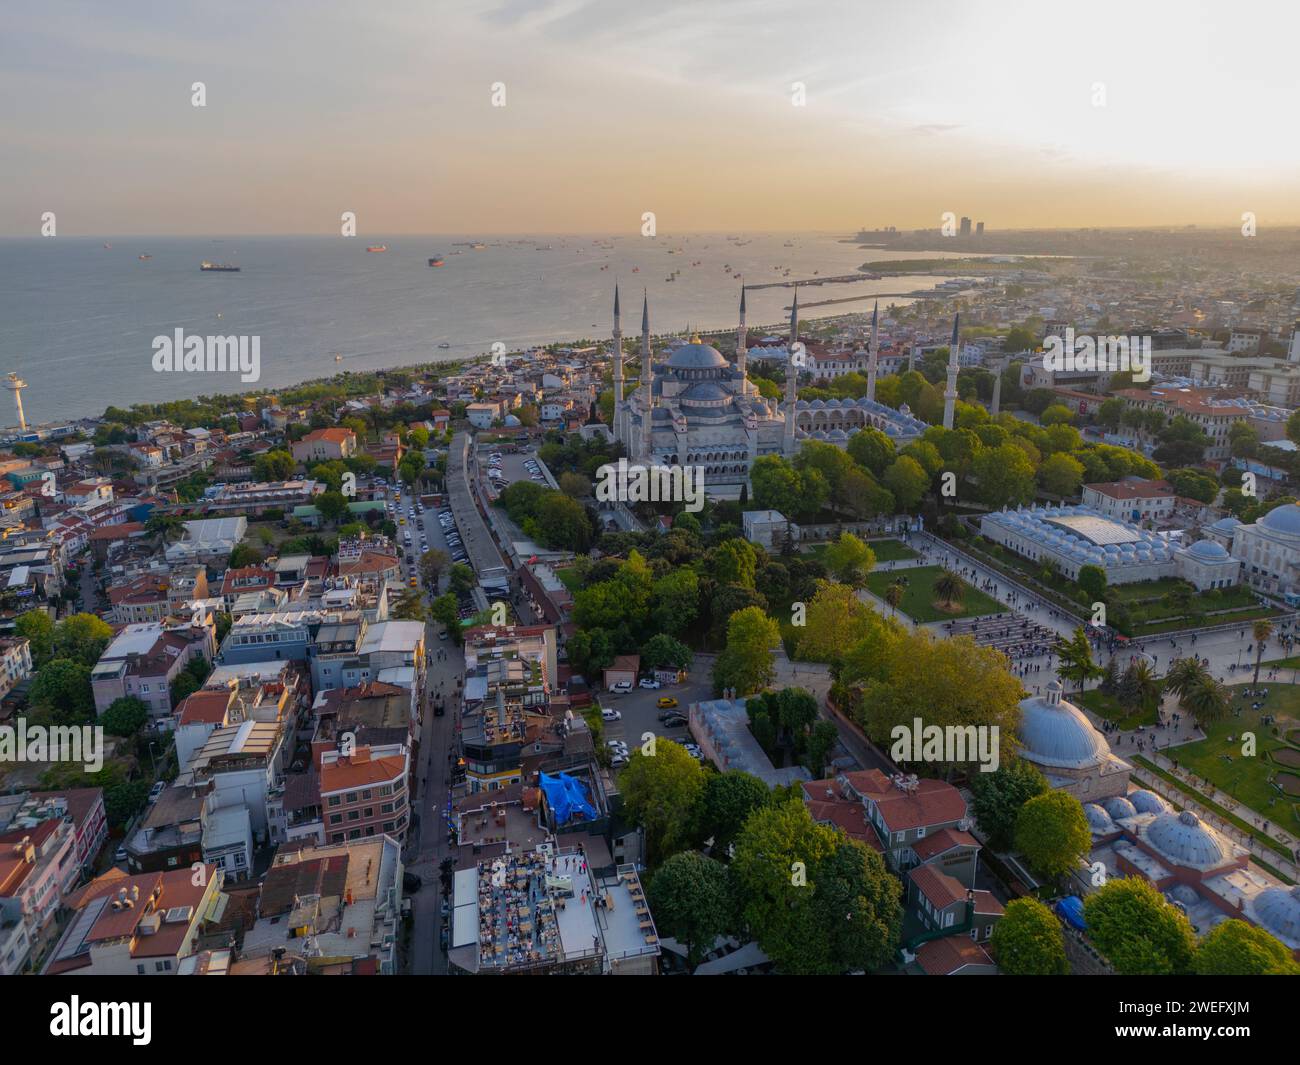 Blue Mosque Sultan Ahmet Camii aerial view at sunset with Sea of Marmara in Sultanahmet in historic city of Istanbul, Turkey. Historic Areas of Istanb Stock Photo